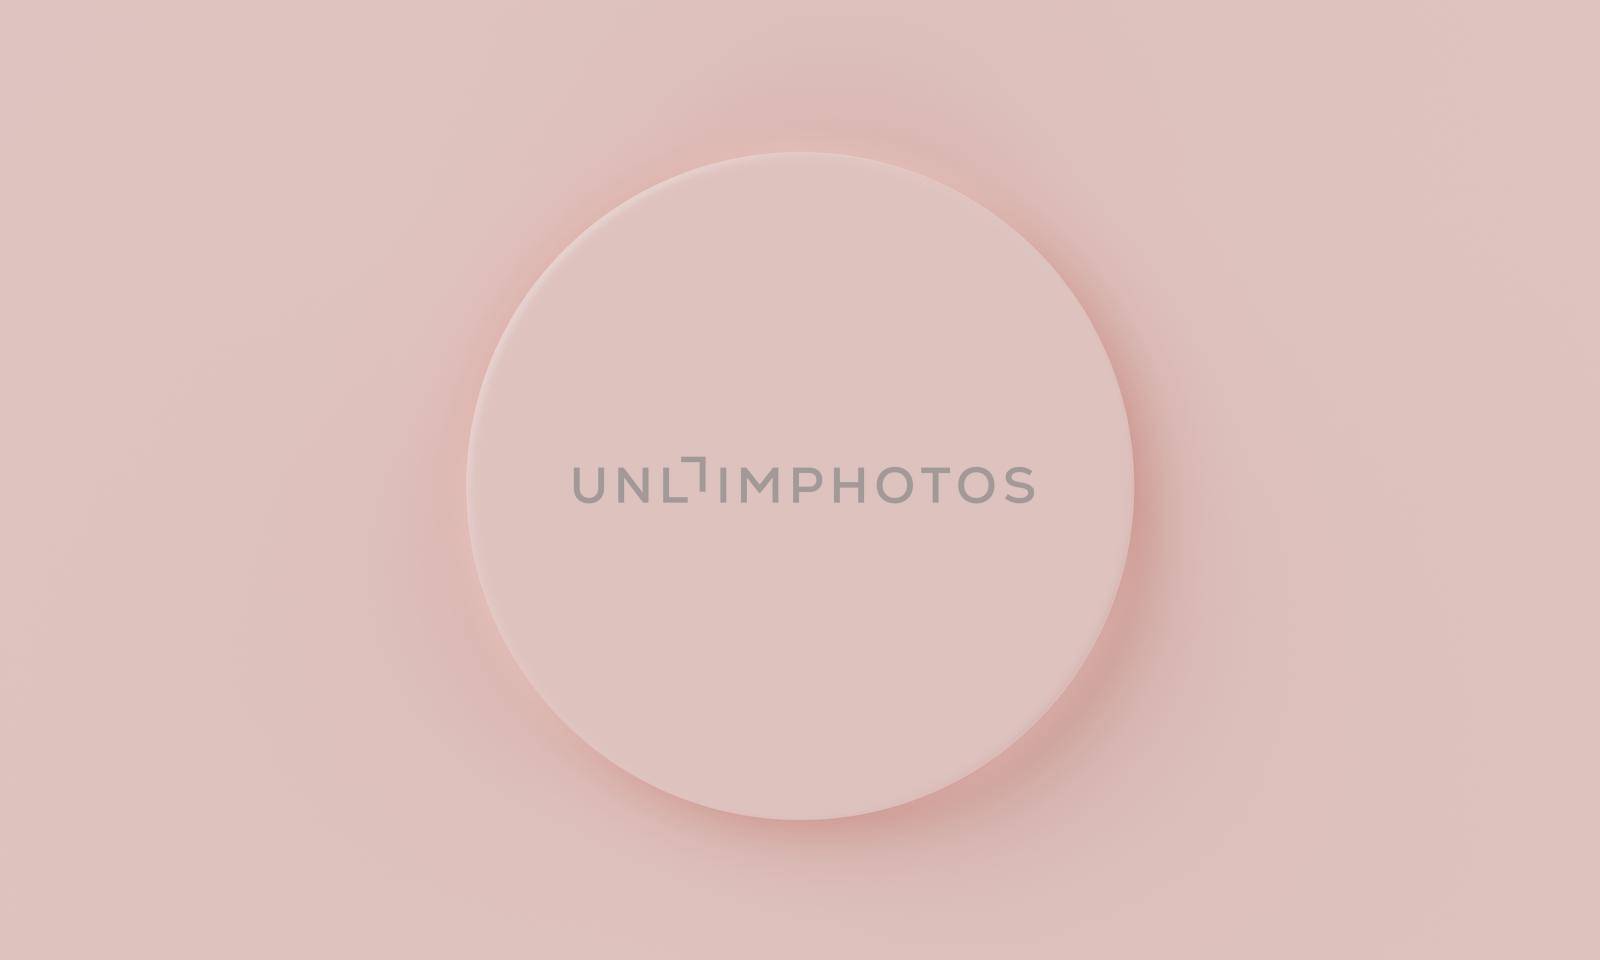 Top view coral pink minimal circular product podium background. Abstract and object concept. 3D illustration rendering by MiniStocker